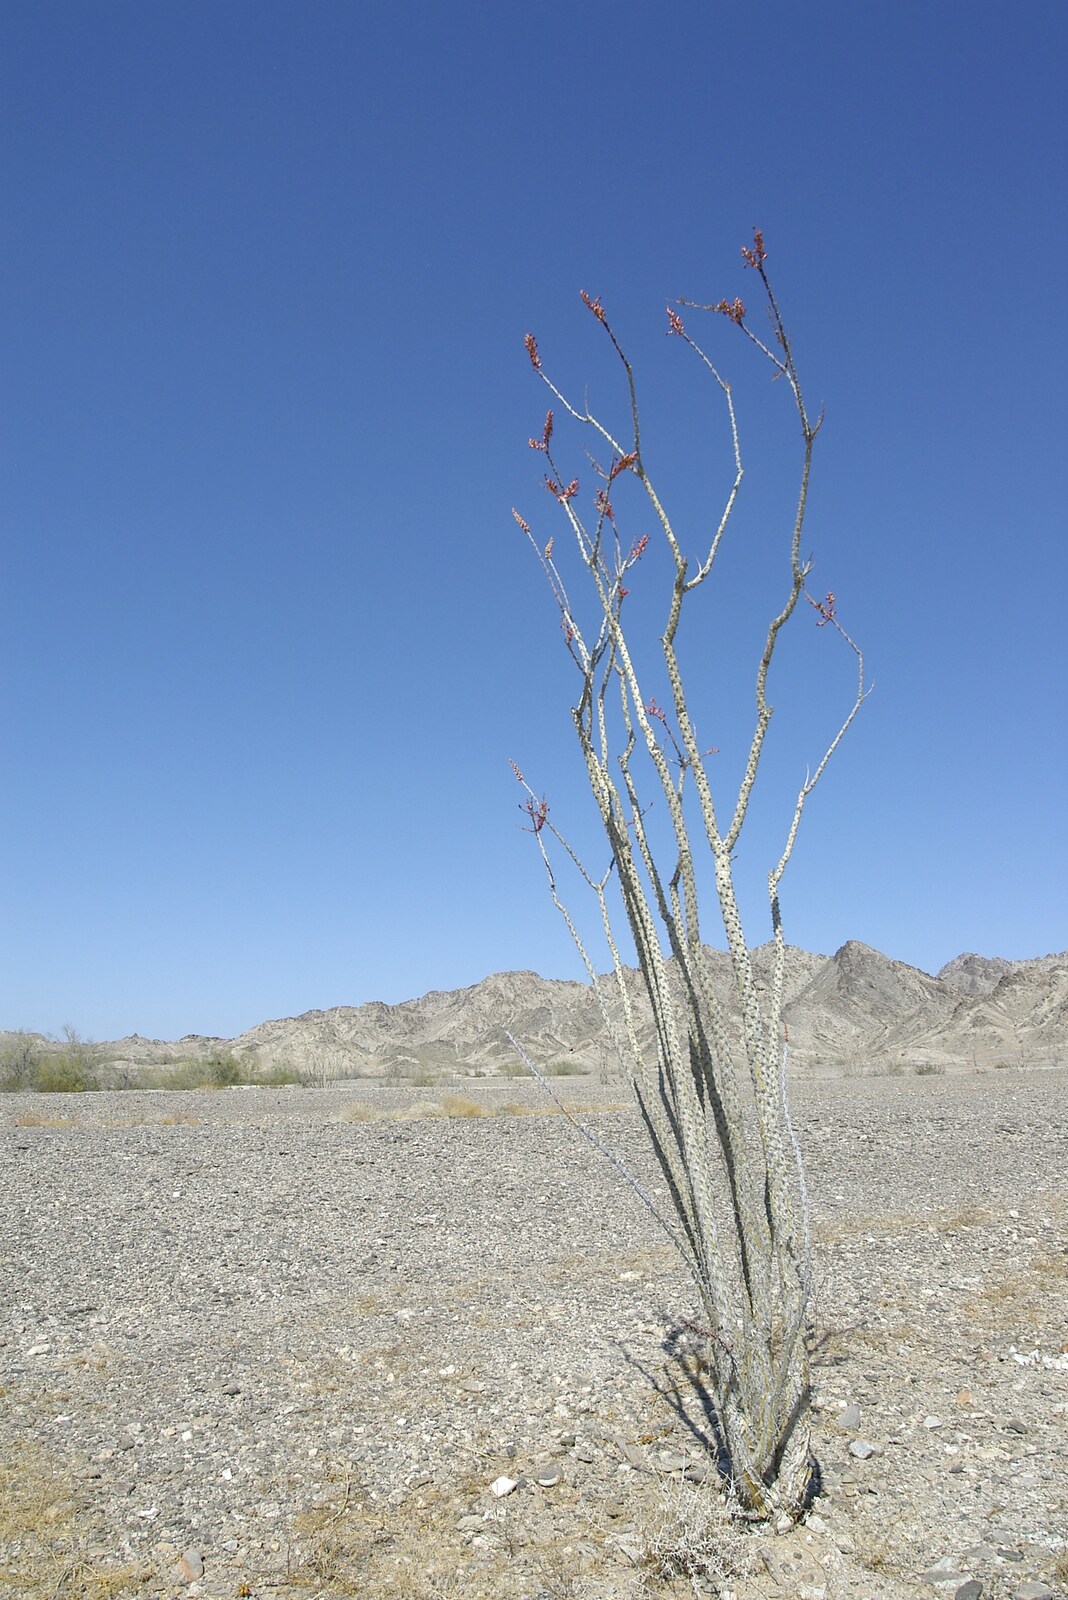 A solitary Ocotillo plant flowers in the desert from San Diego Seven: The Desert and the Dunes, Arizona and California, US - 22nd April